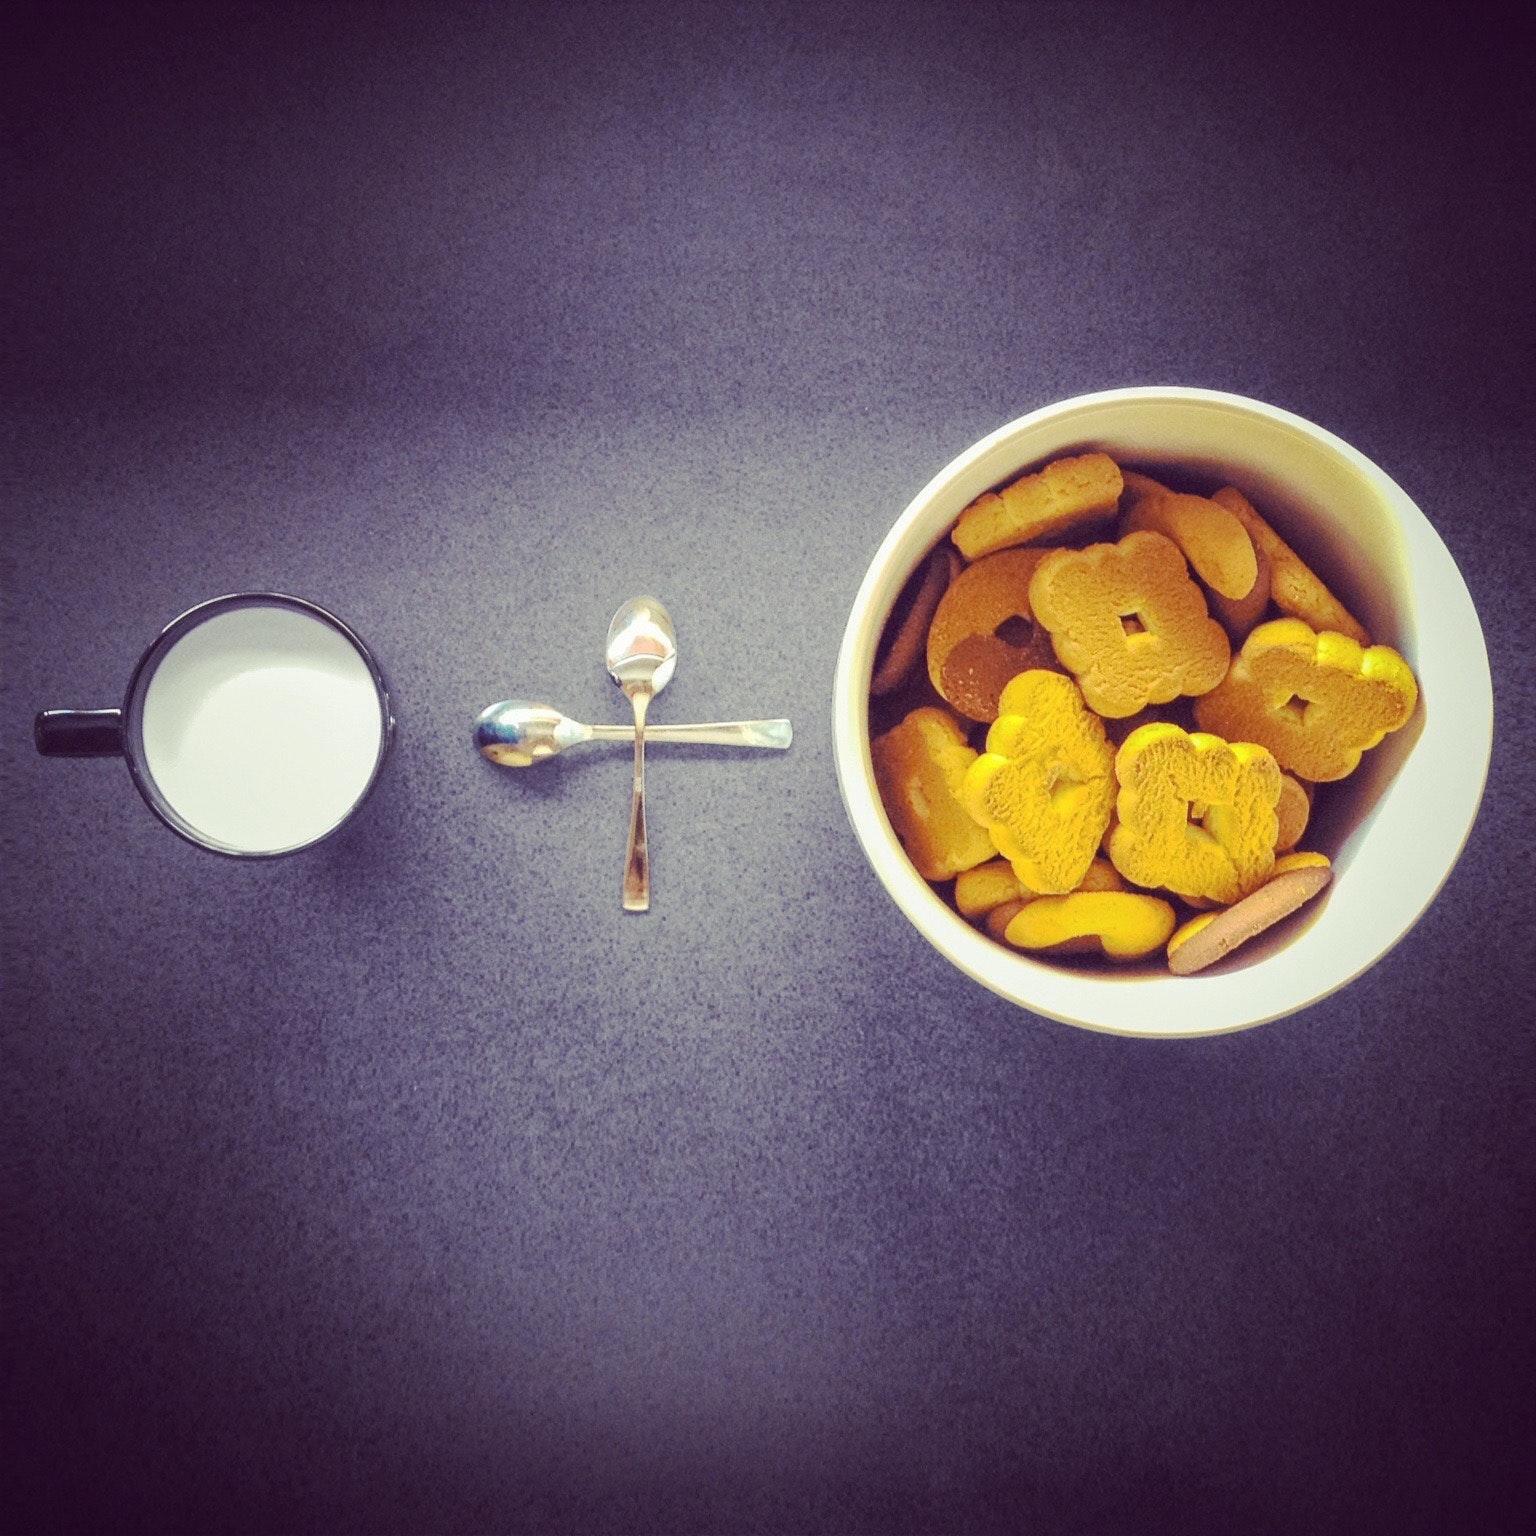 Crackers in round white ceramic cup near two stainless steel spoons and black ceramic mug photo